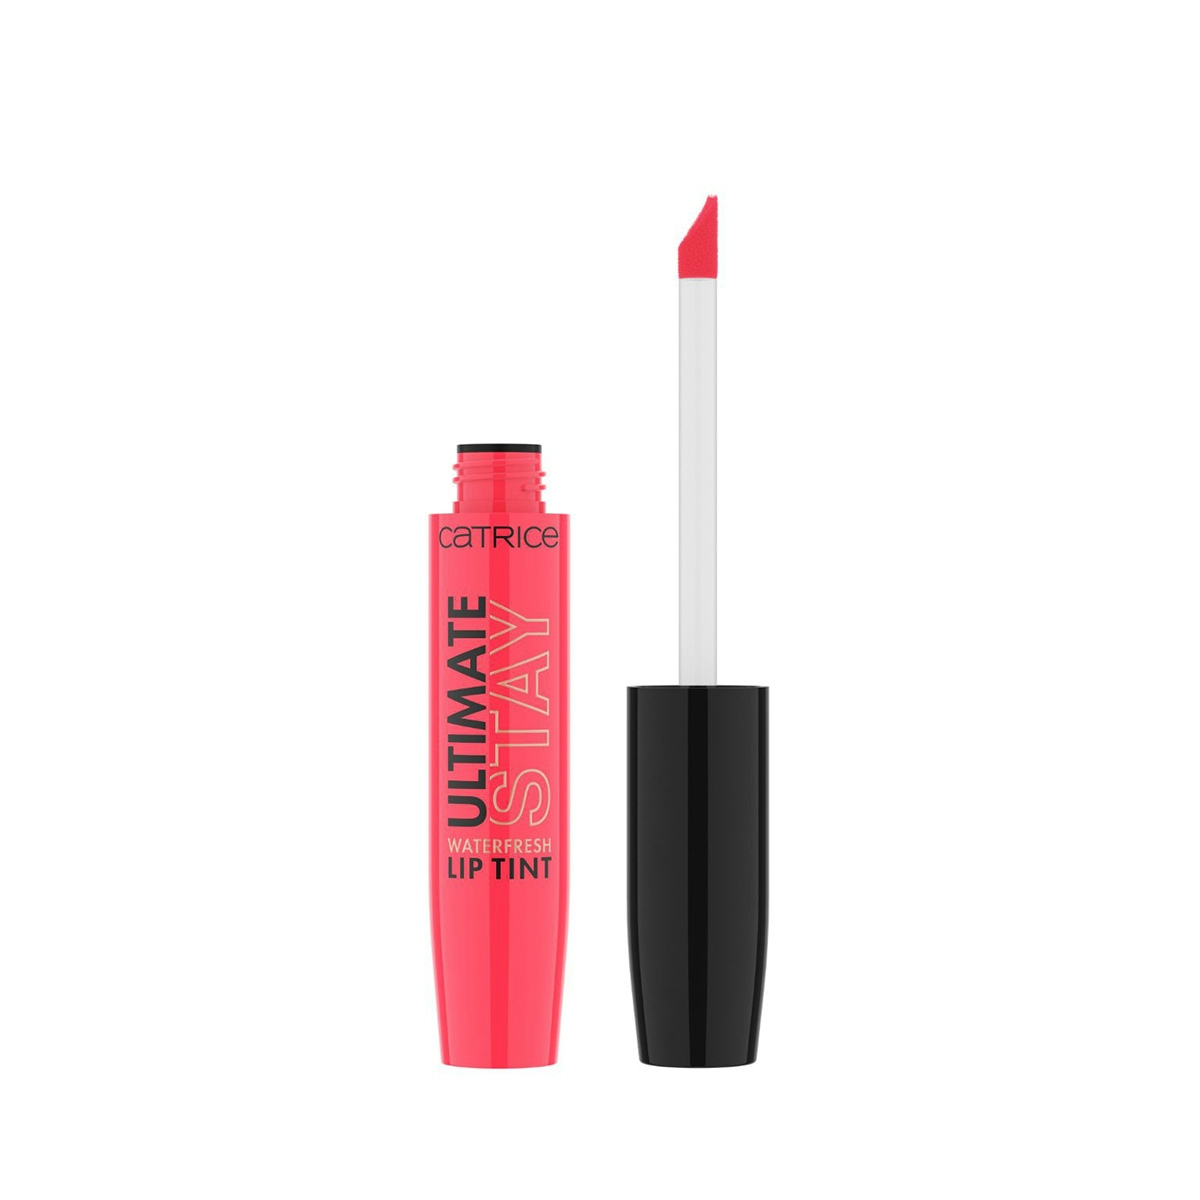 Tinte labial Ultimate Stay Waterfresh Catrice